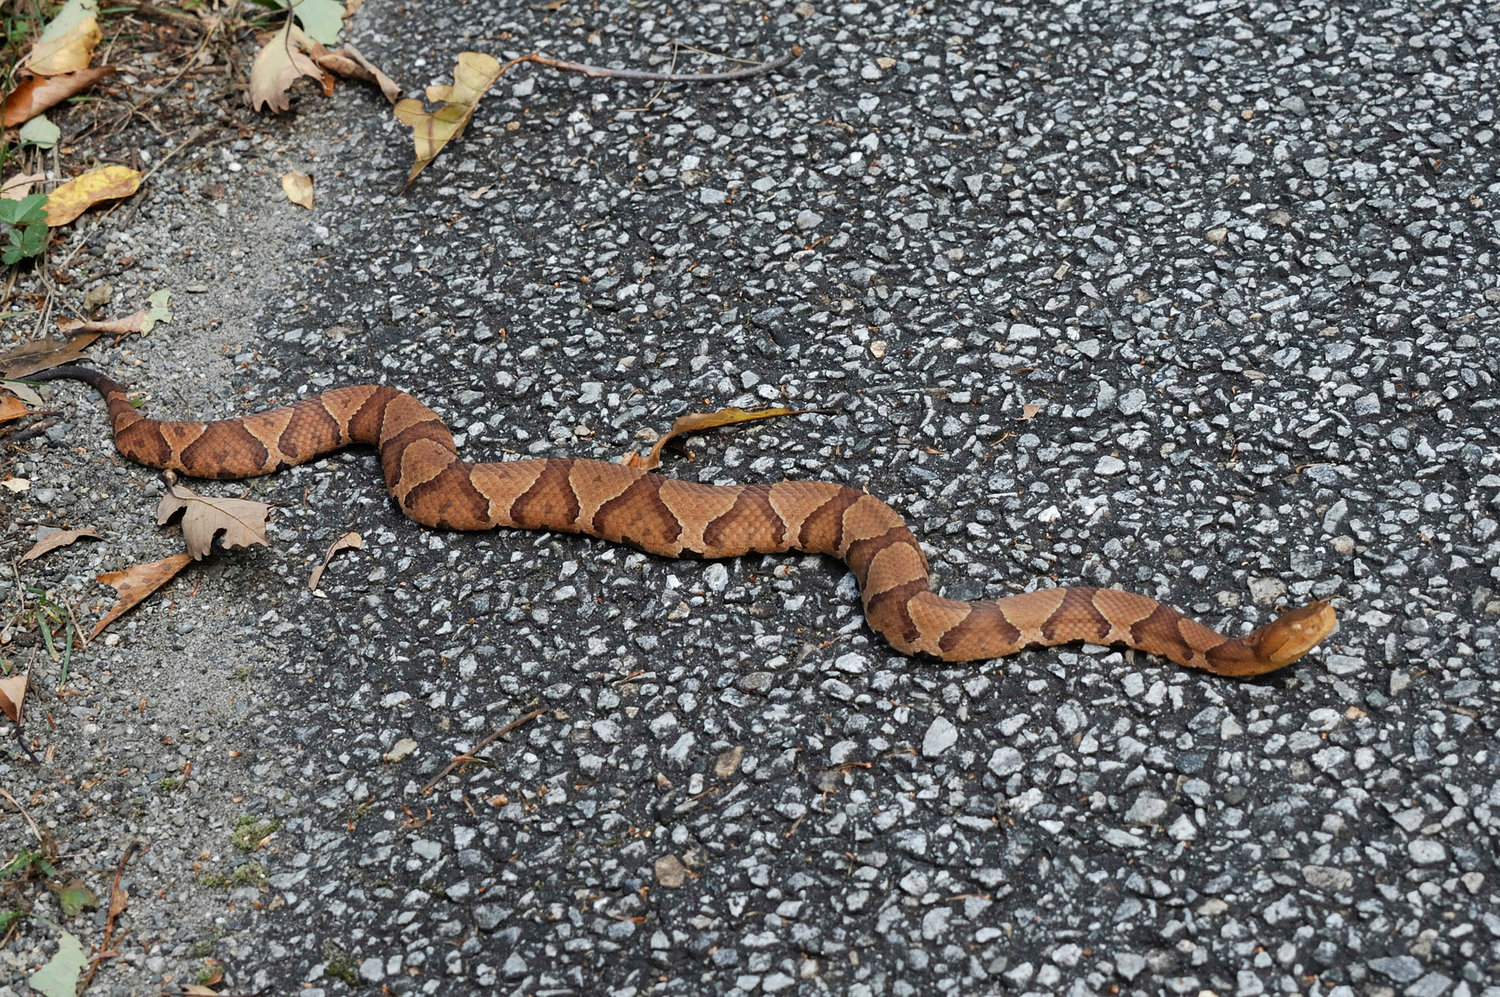 This is a Northern copperhead shown for comparison. The back markings are bands rather than spots and alternate between light and dark brown. The head is wide and is usually held up at a 45-degree angle, as shown here. Copperheads are pit vipers, and the loreal pit used for sensing prey are faintly visible just forward and down from the eye.